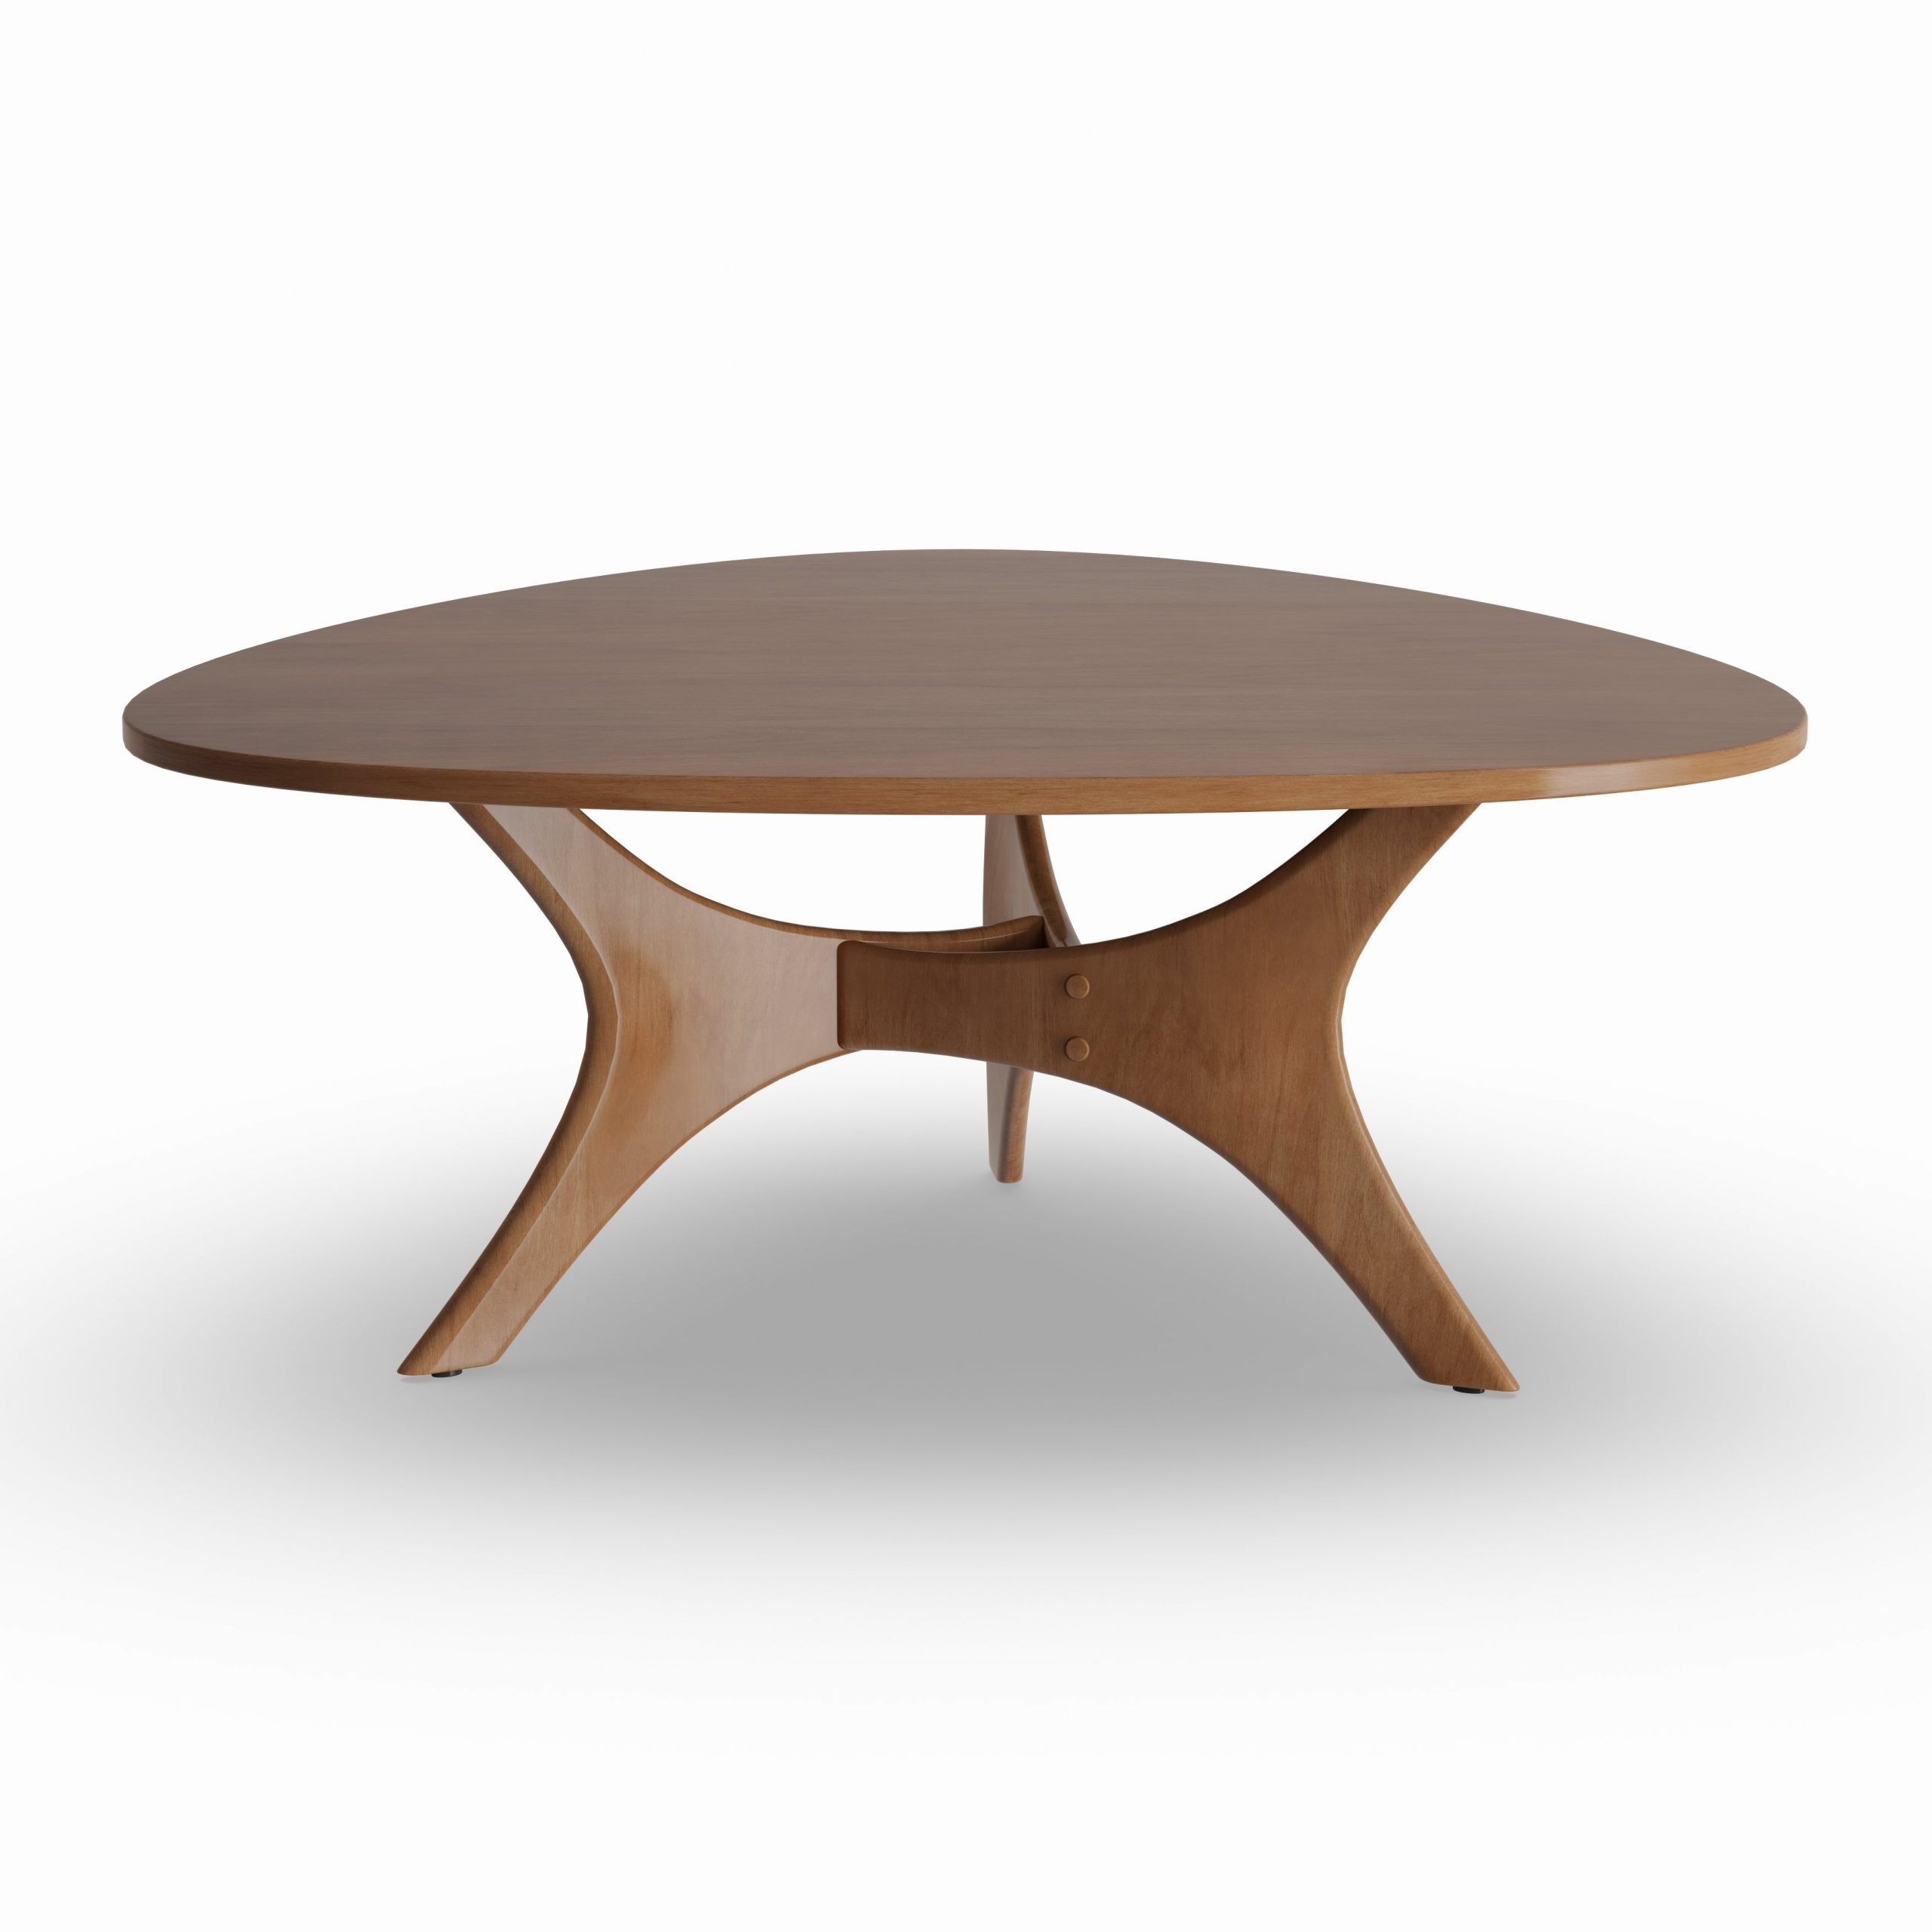 Handys Brown Triangle Wood Coffee Table | Handys & Co Within 2 Shelf Coffee Tables (View 14 of 15)